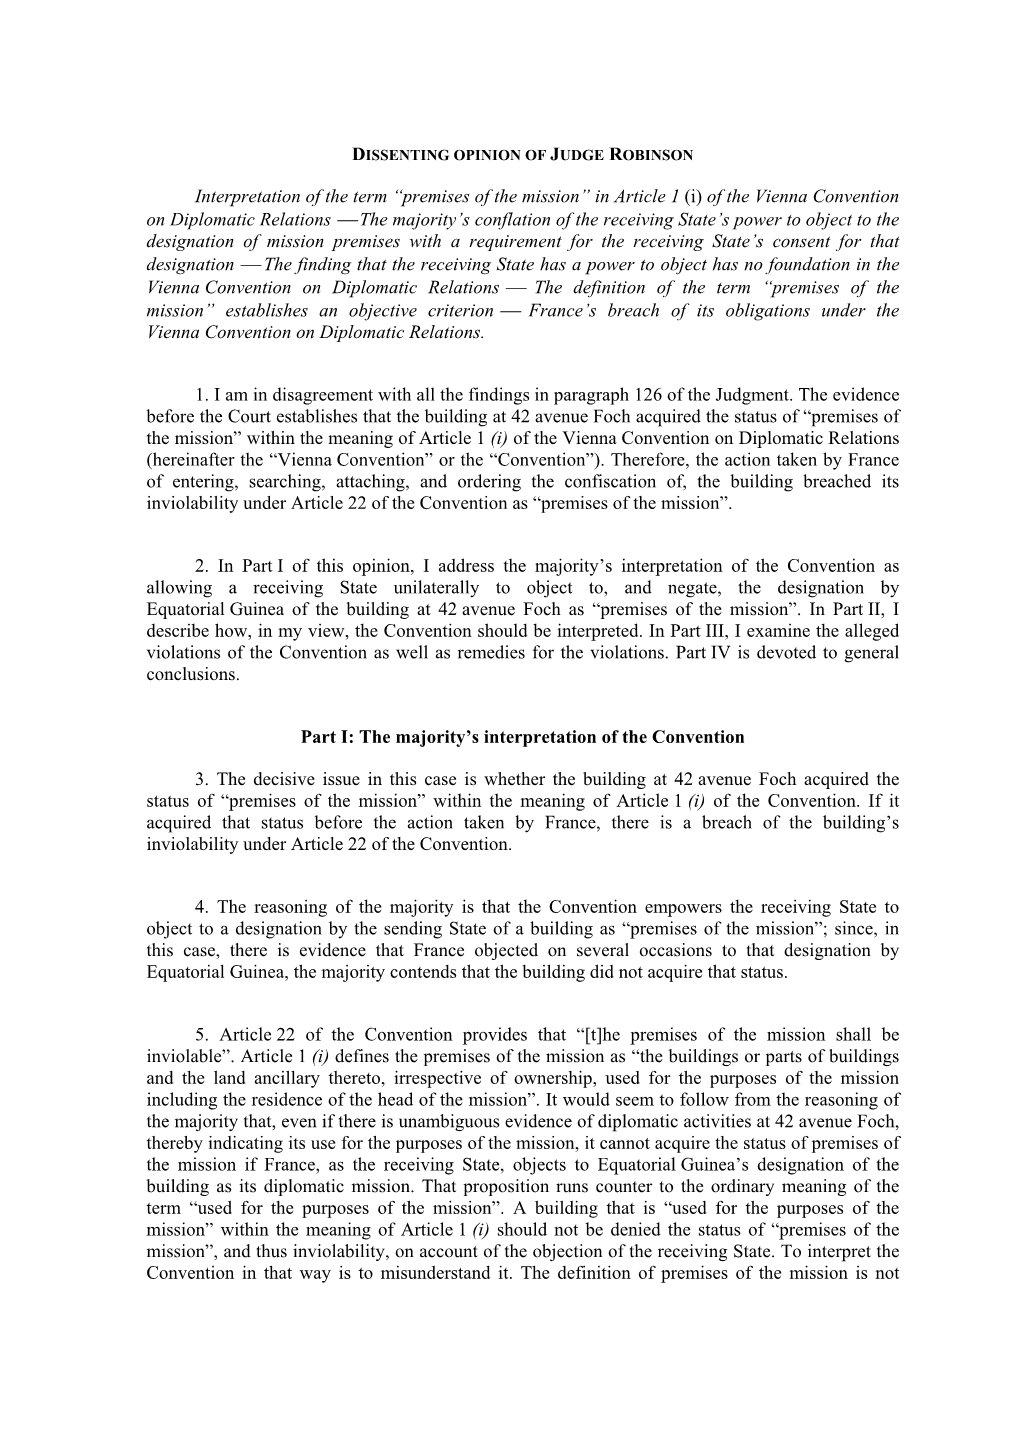 (I) of the Vienna Convention on Diplomatic Relations